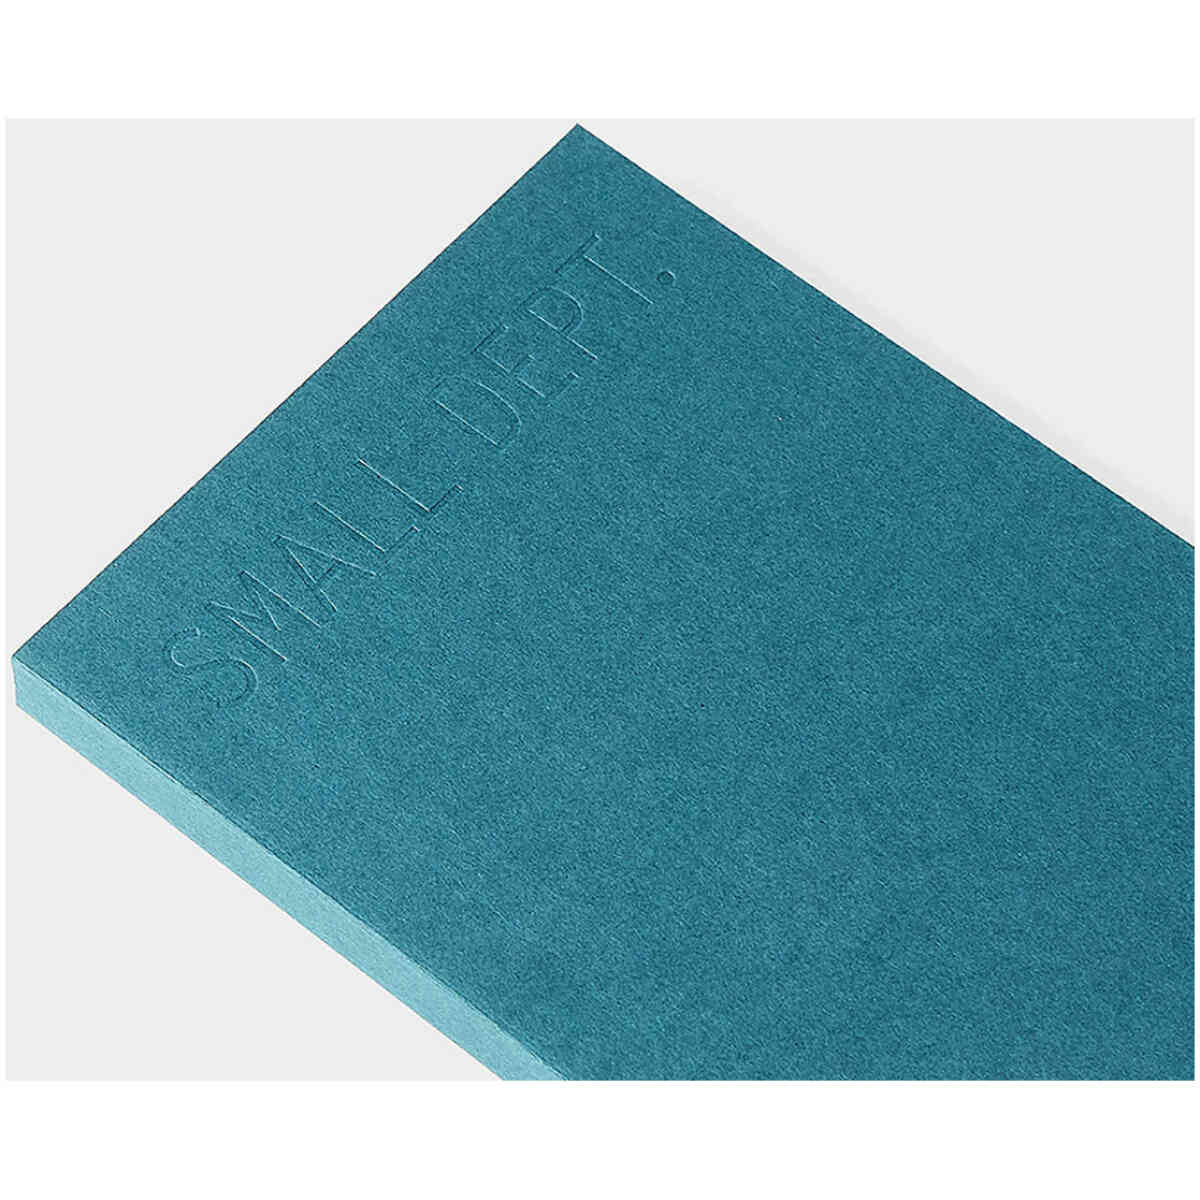 small dept weekly planner blue green 2